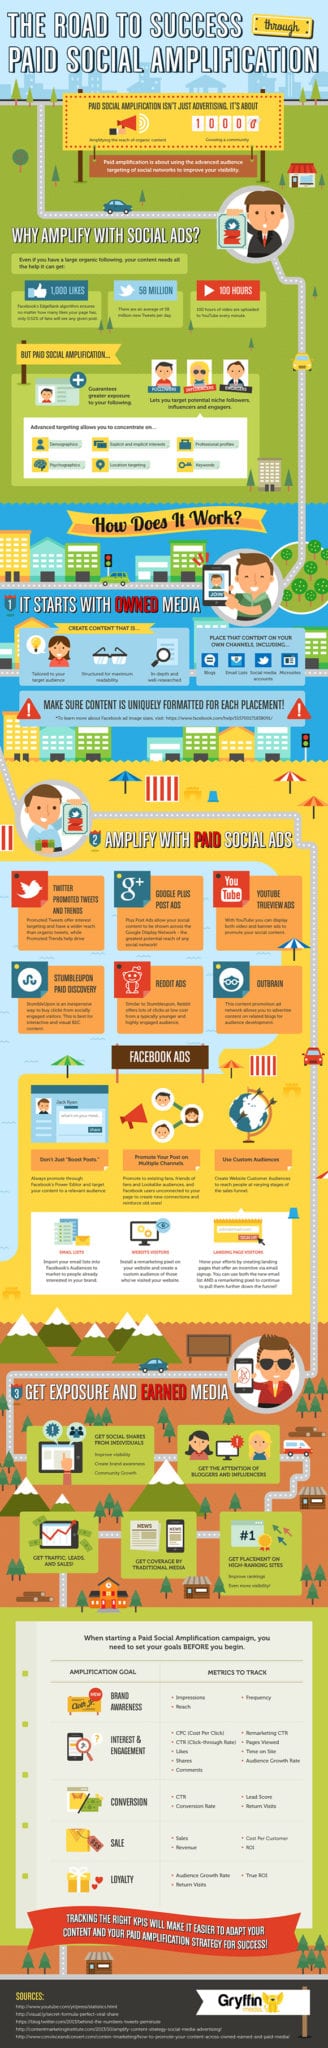 The Road to Success Through Paid Social Amplification [Infographic]